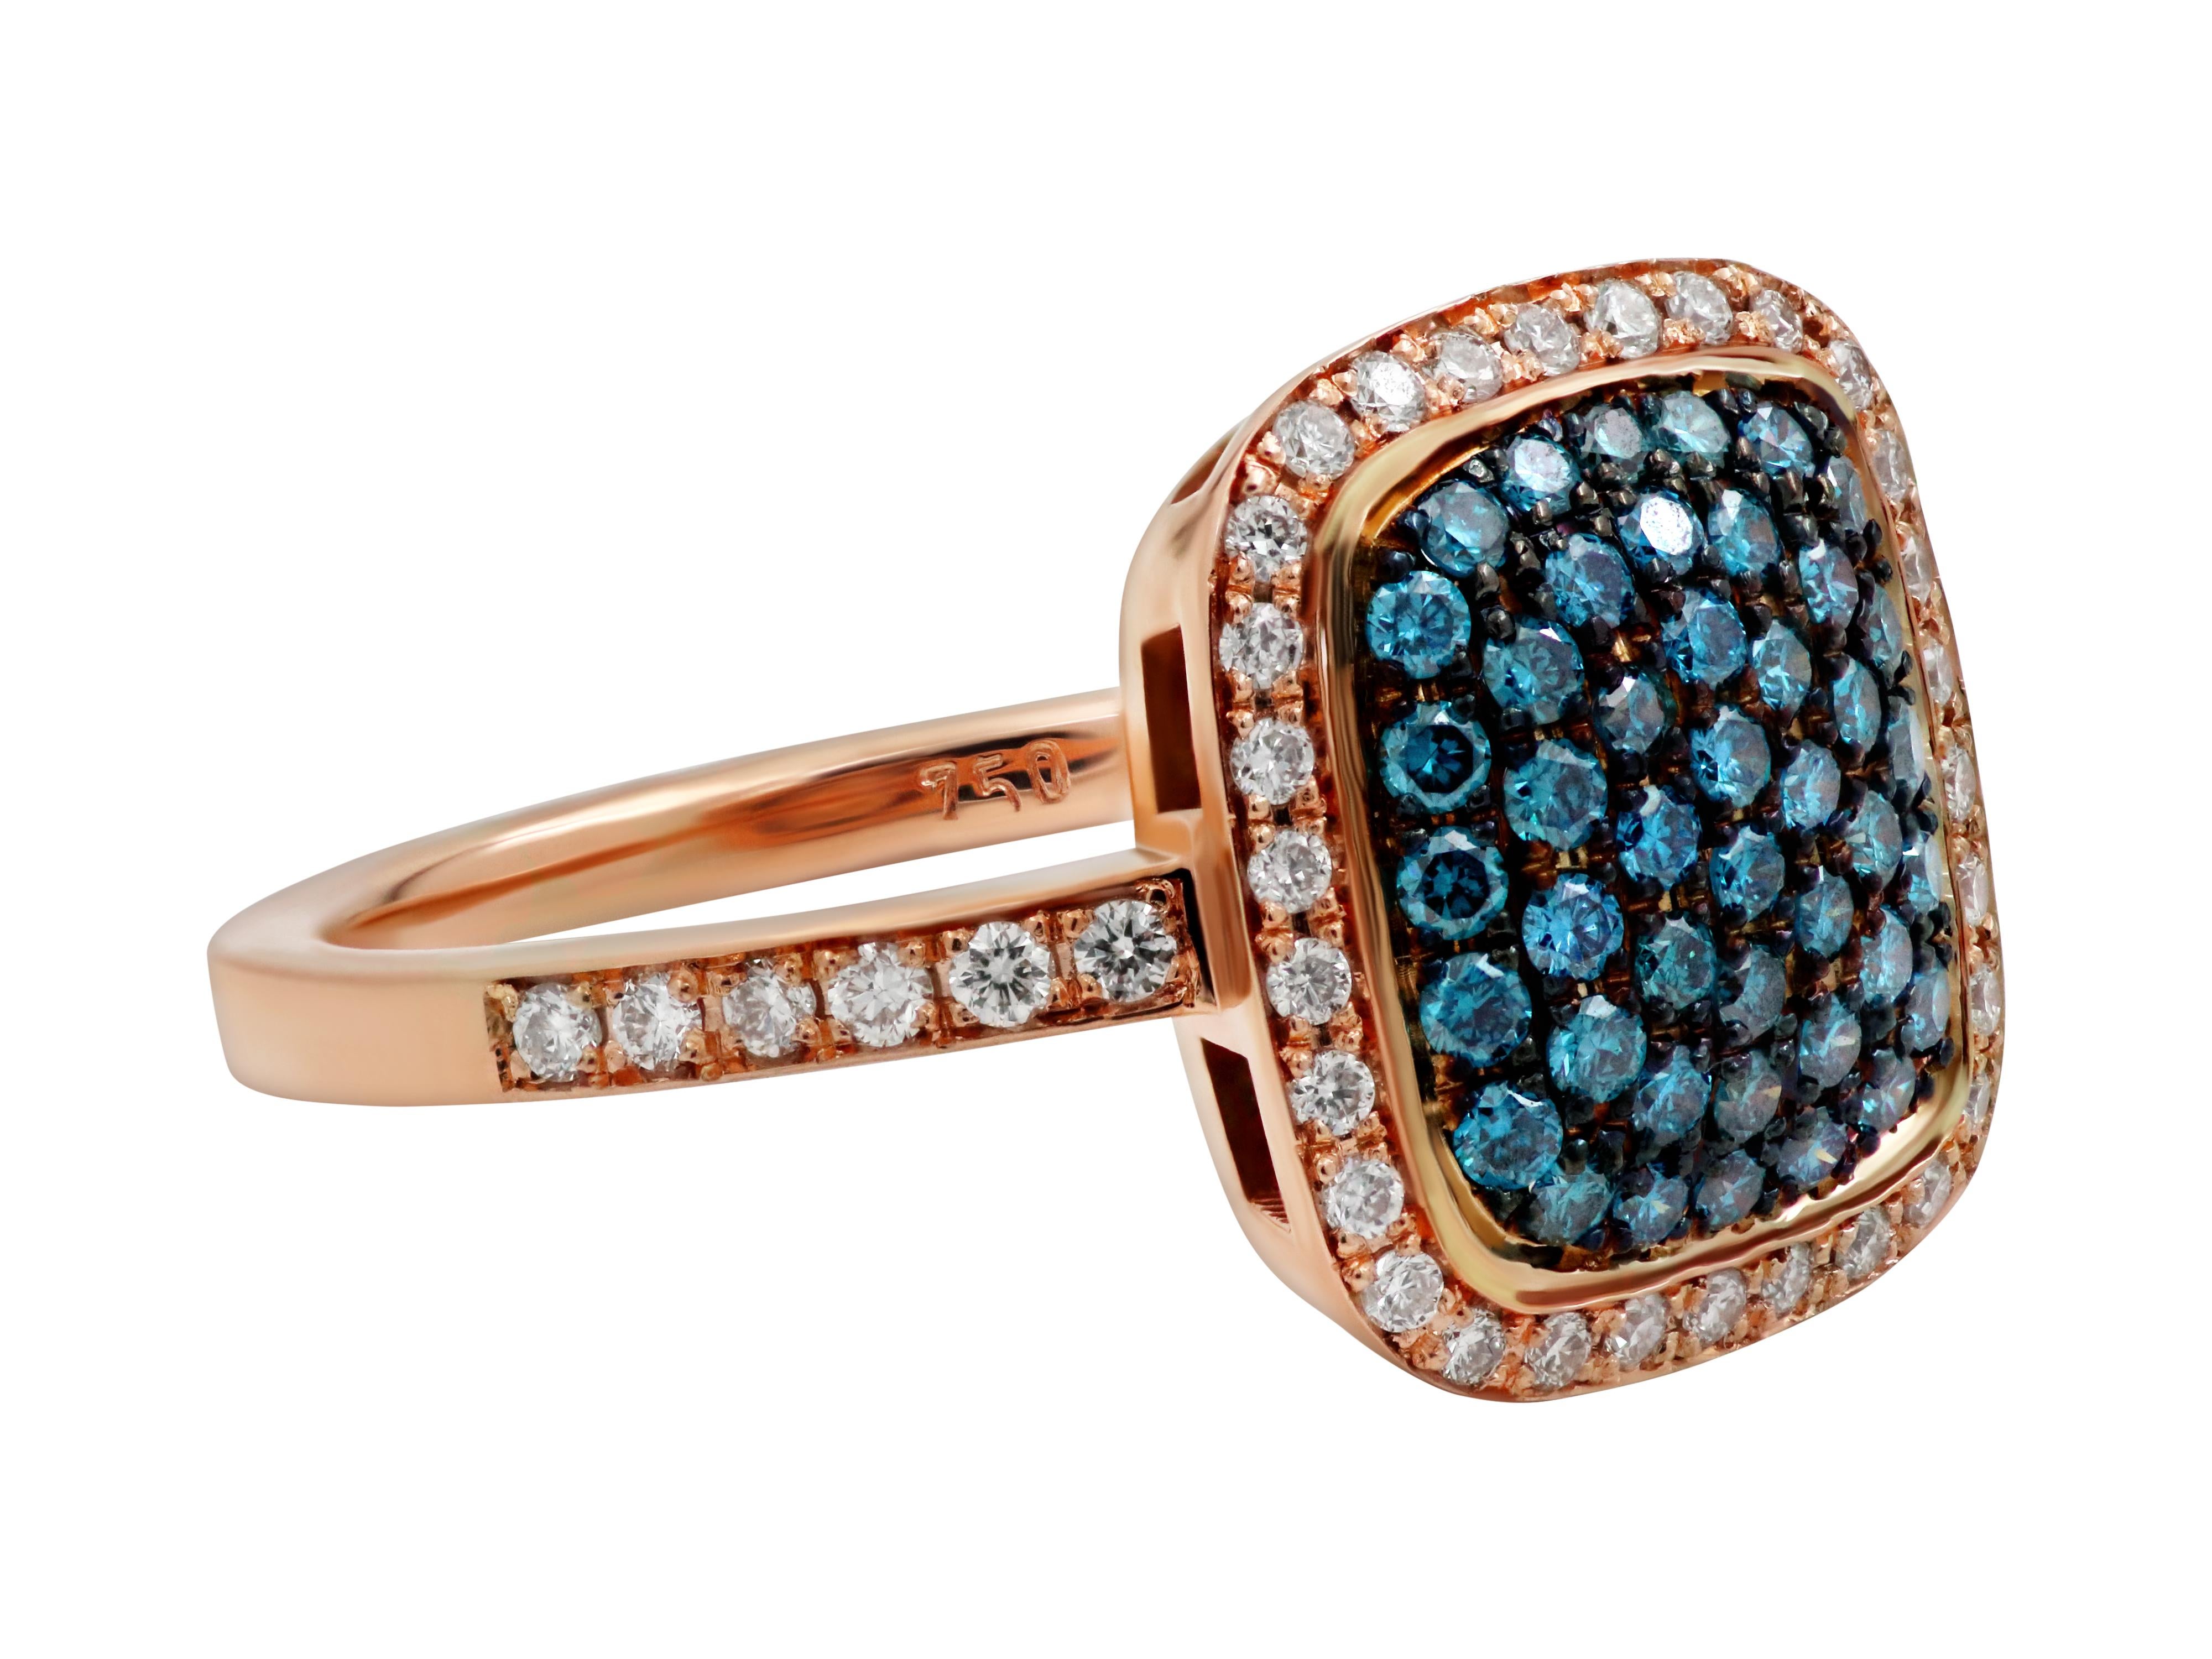 18k rose gold ring with 0.38 carats blue diamonds and 0.23 carats brilliant cut diamonds. 

Ring face: 0.511X0.511”, 1.3X1.3cm